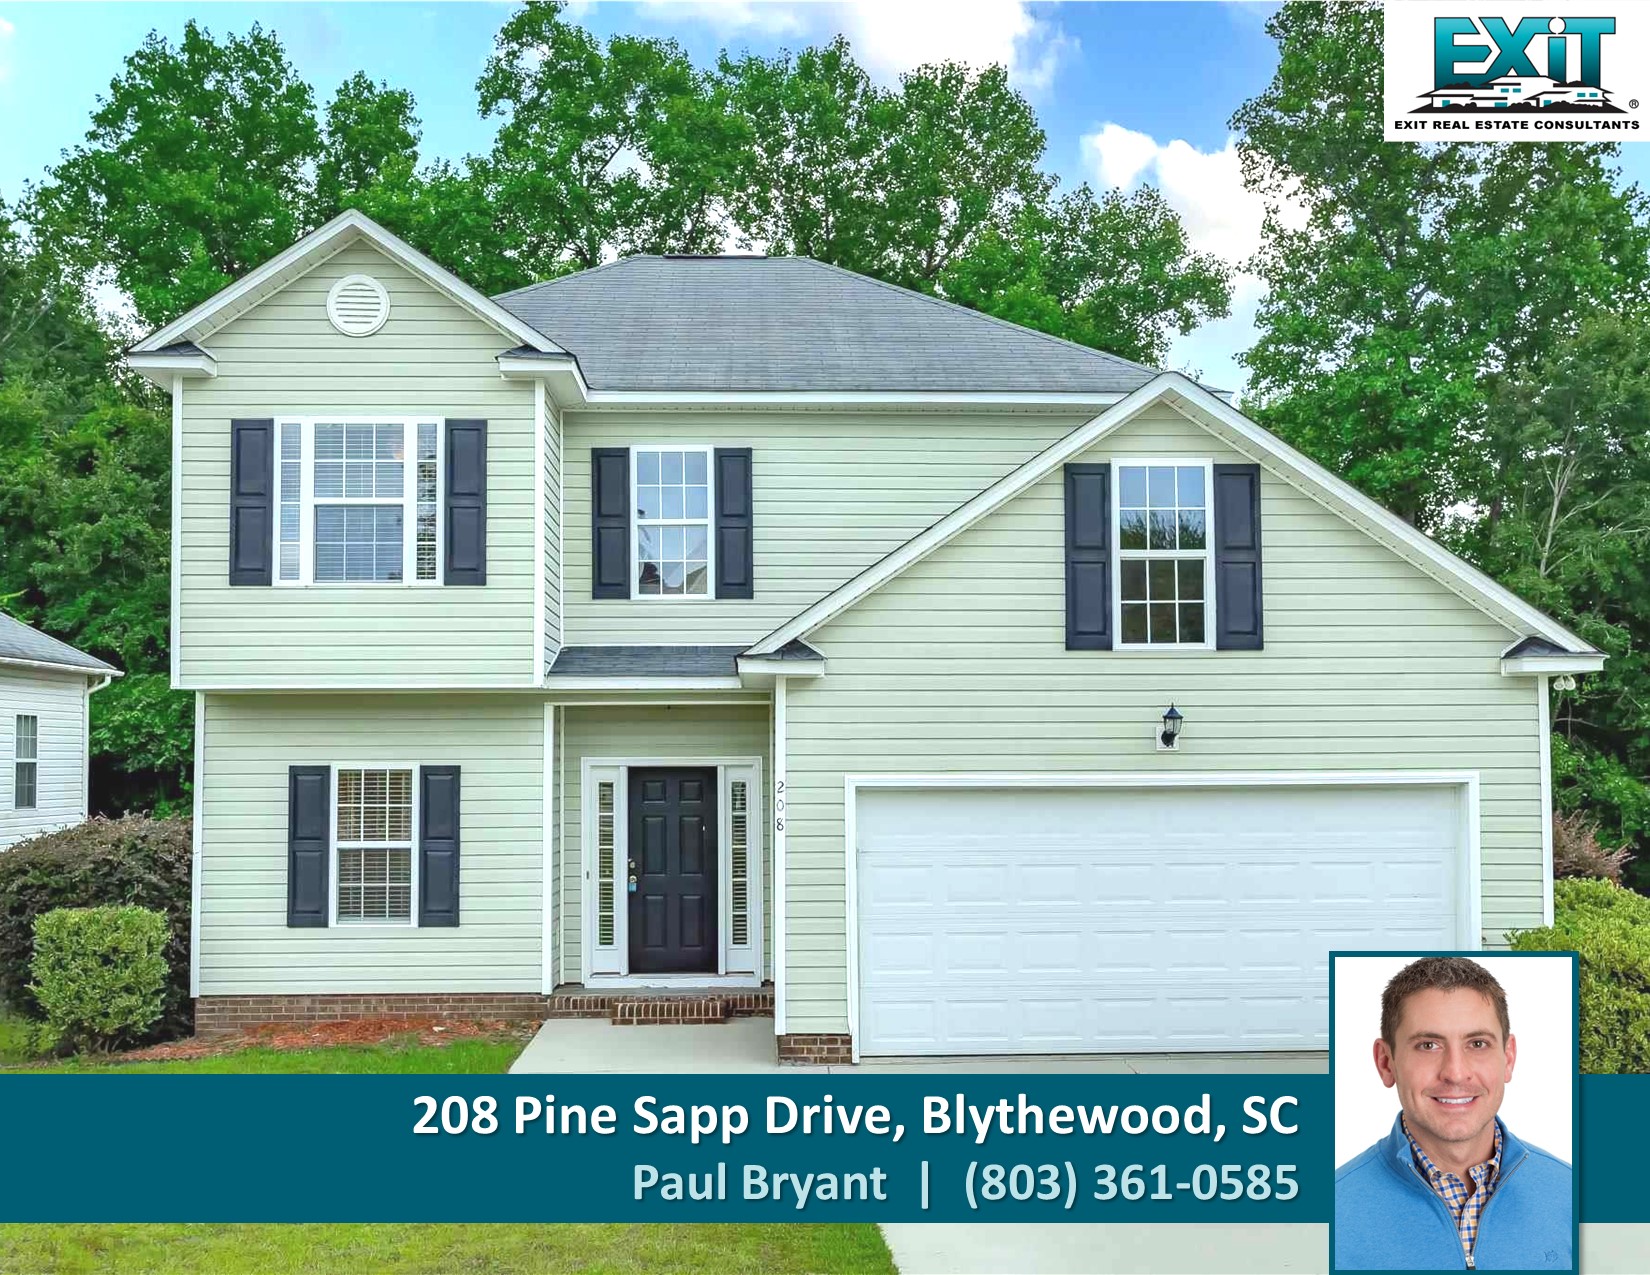 Just listed in Summer Pines - Blythewood